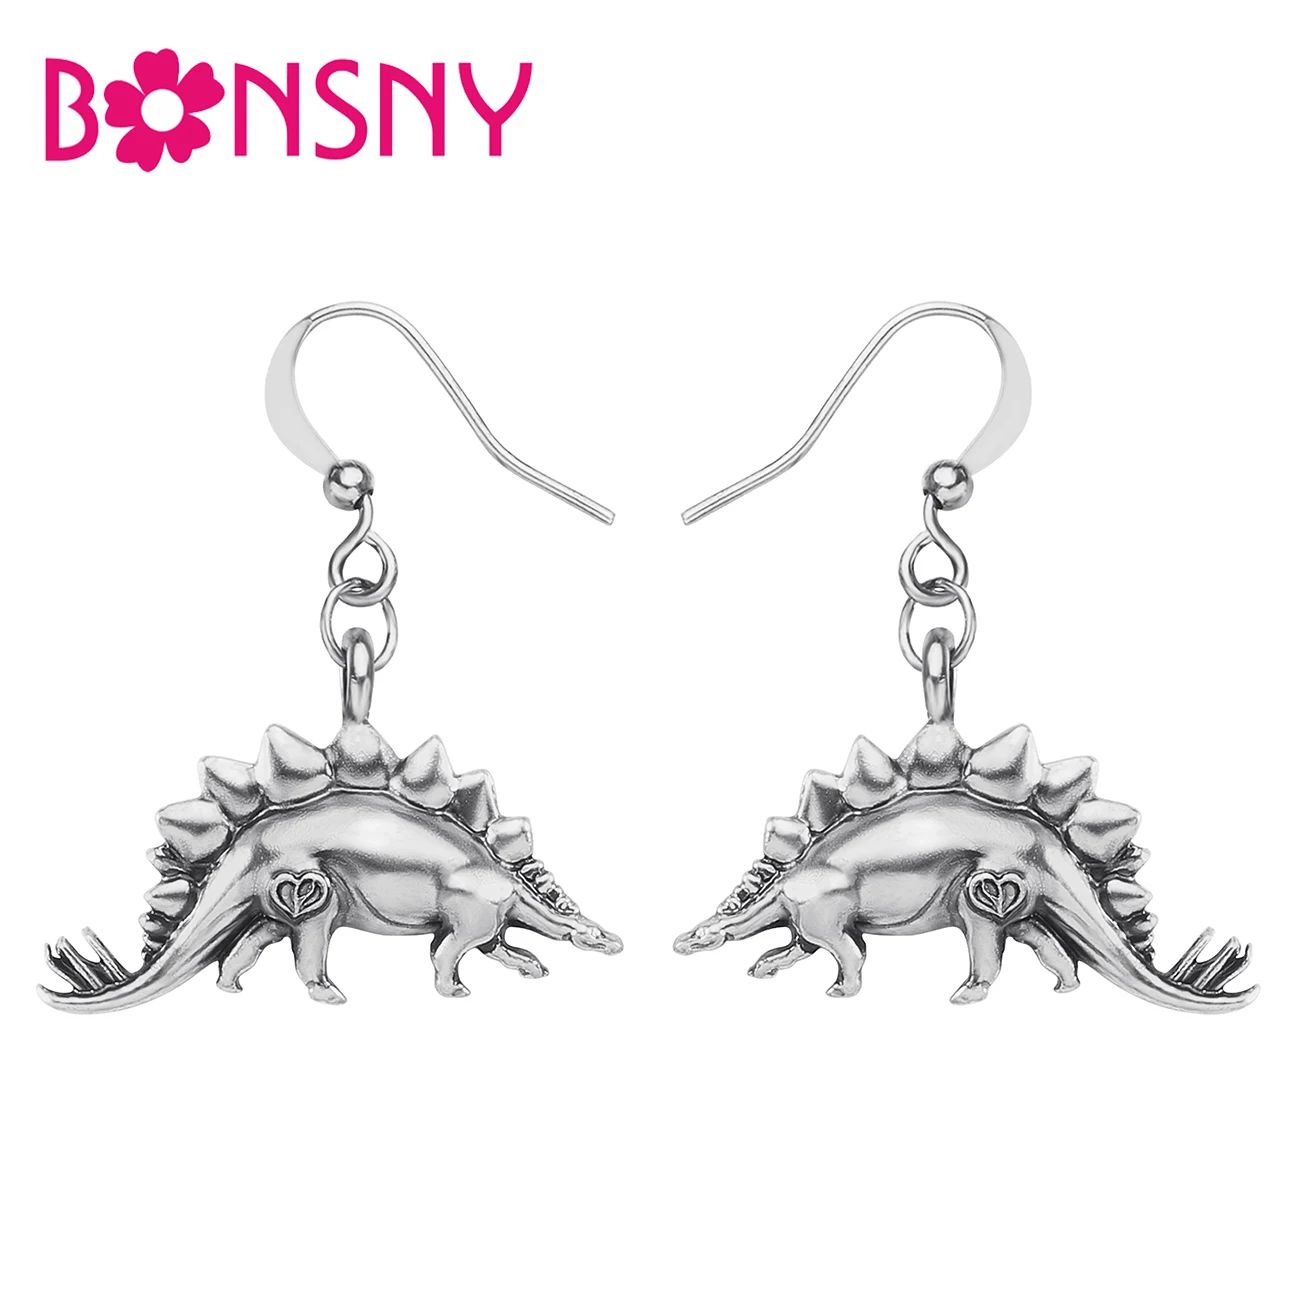 

BONSNY Alloy Antique Gold Plated Cute Stegosaurus Dragons Earrings Long Drop Dangle Fashion Jewelry For Women Girls Teens Gifts